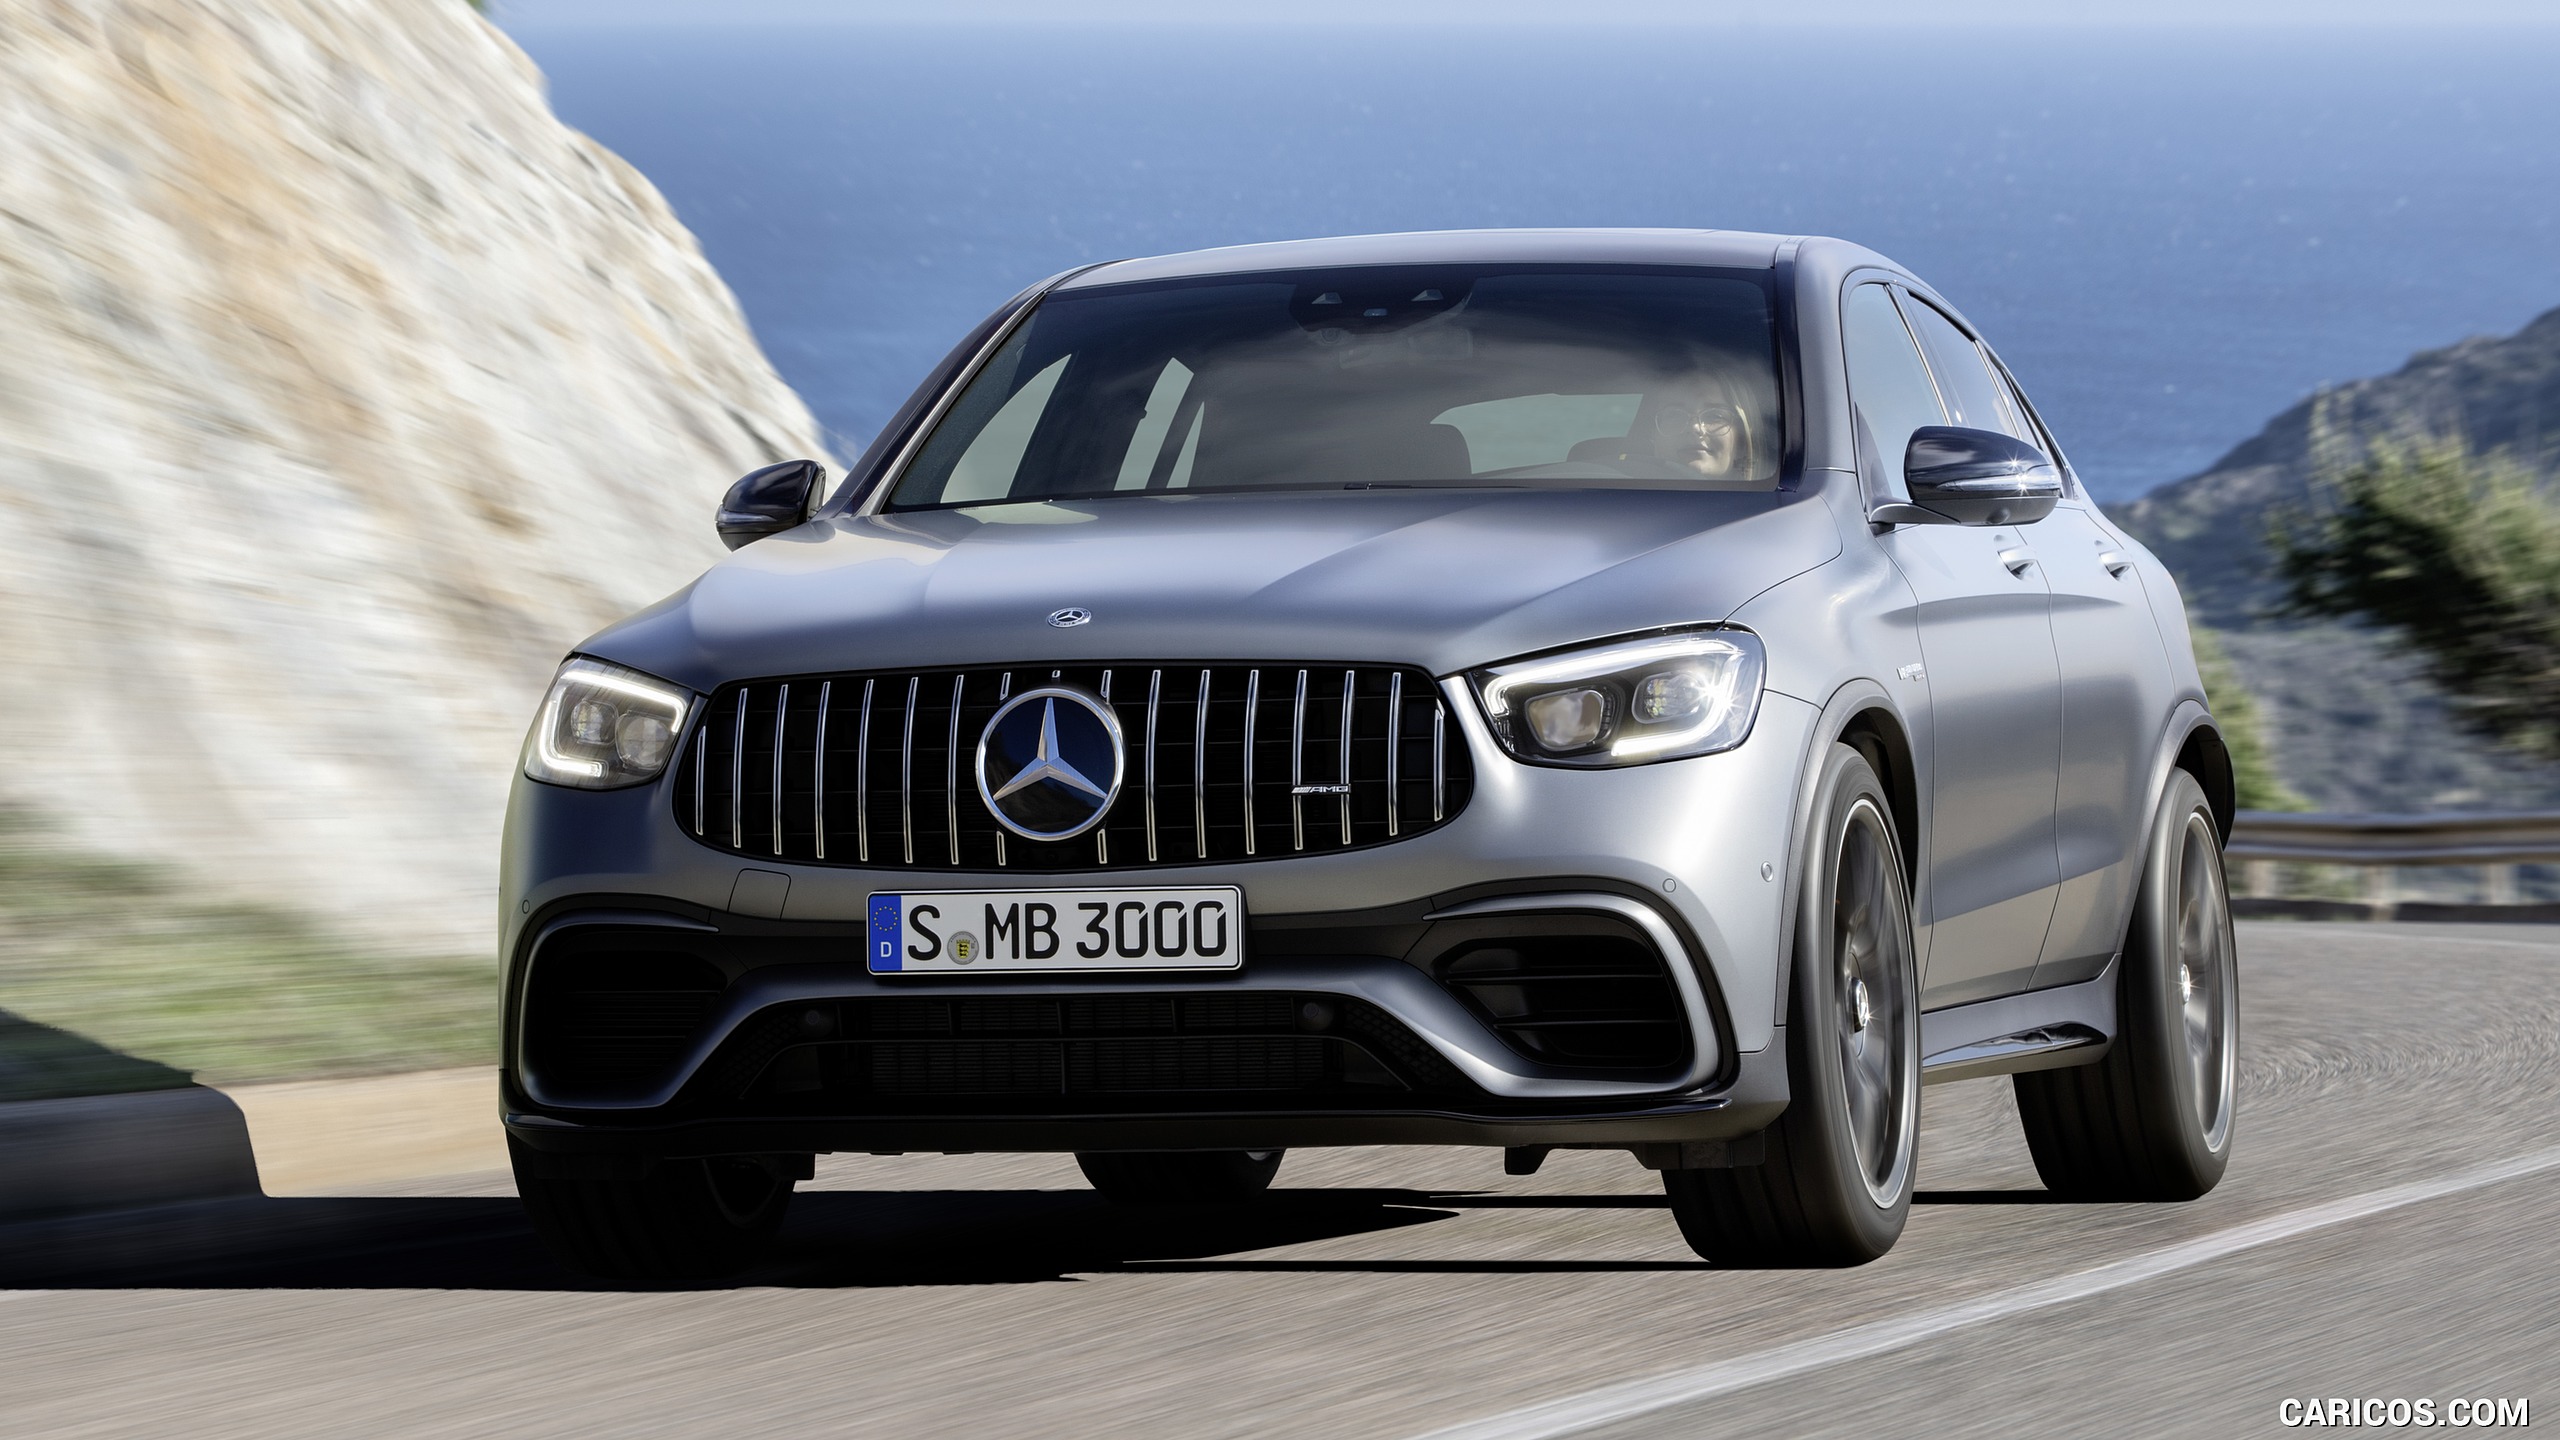 2020 Mercedes-AMG GLC 63 S 4MATIC+ Coupe - Front, #5 of 102